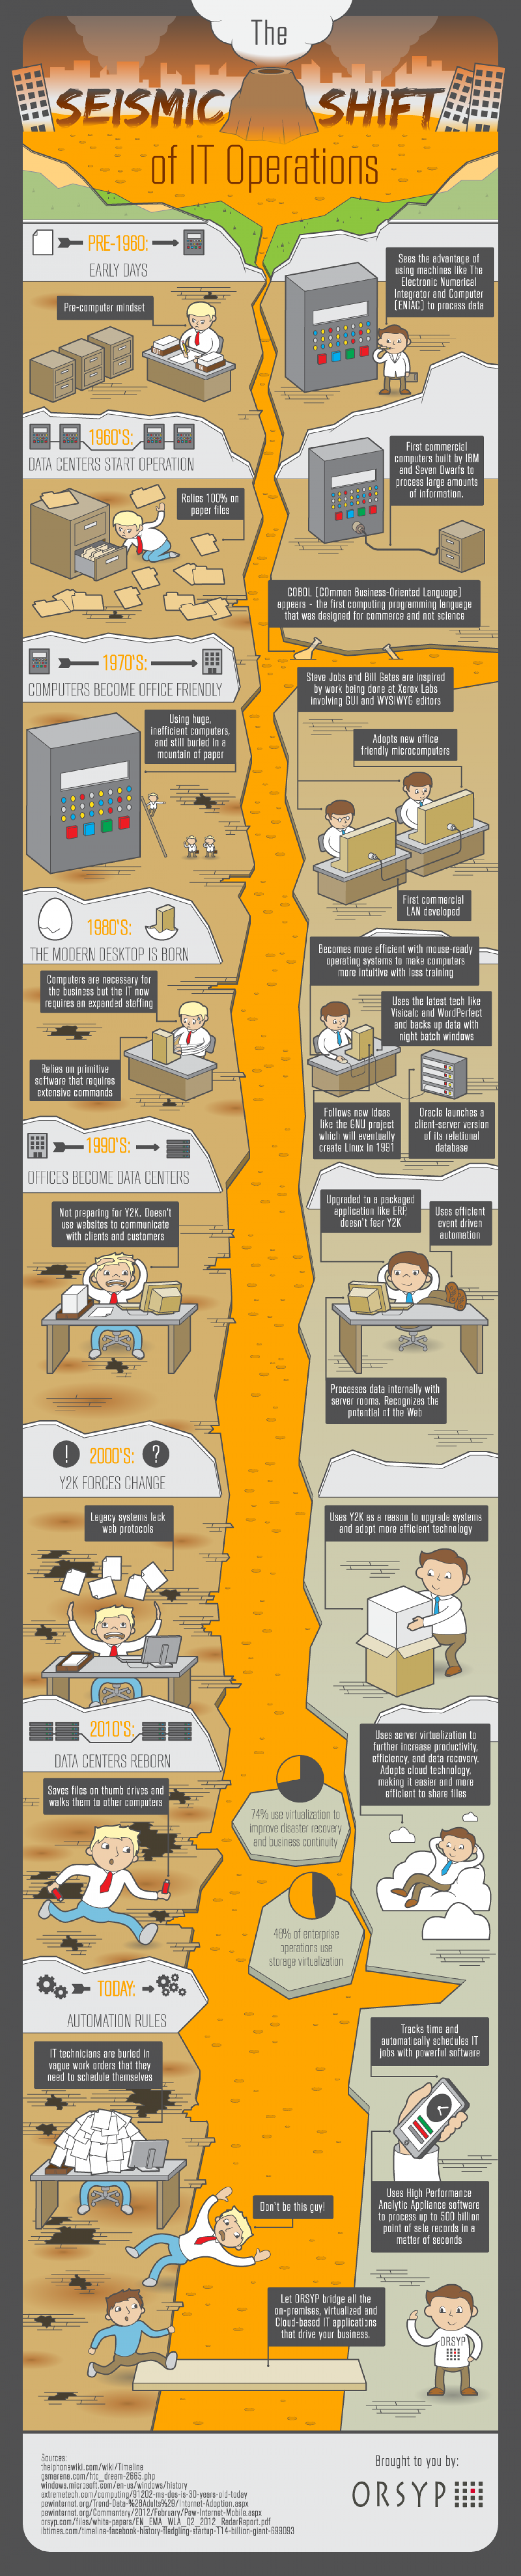 The IT Operations Seismic Shift Can't Be Stopped Infographic